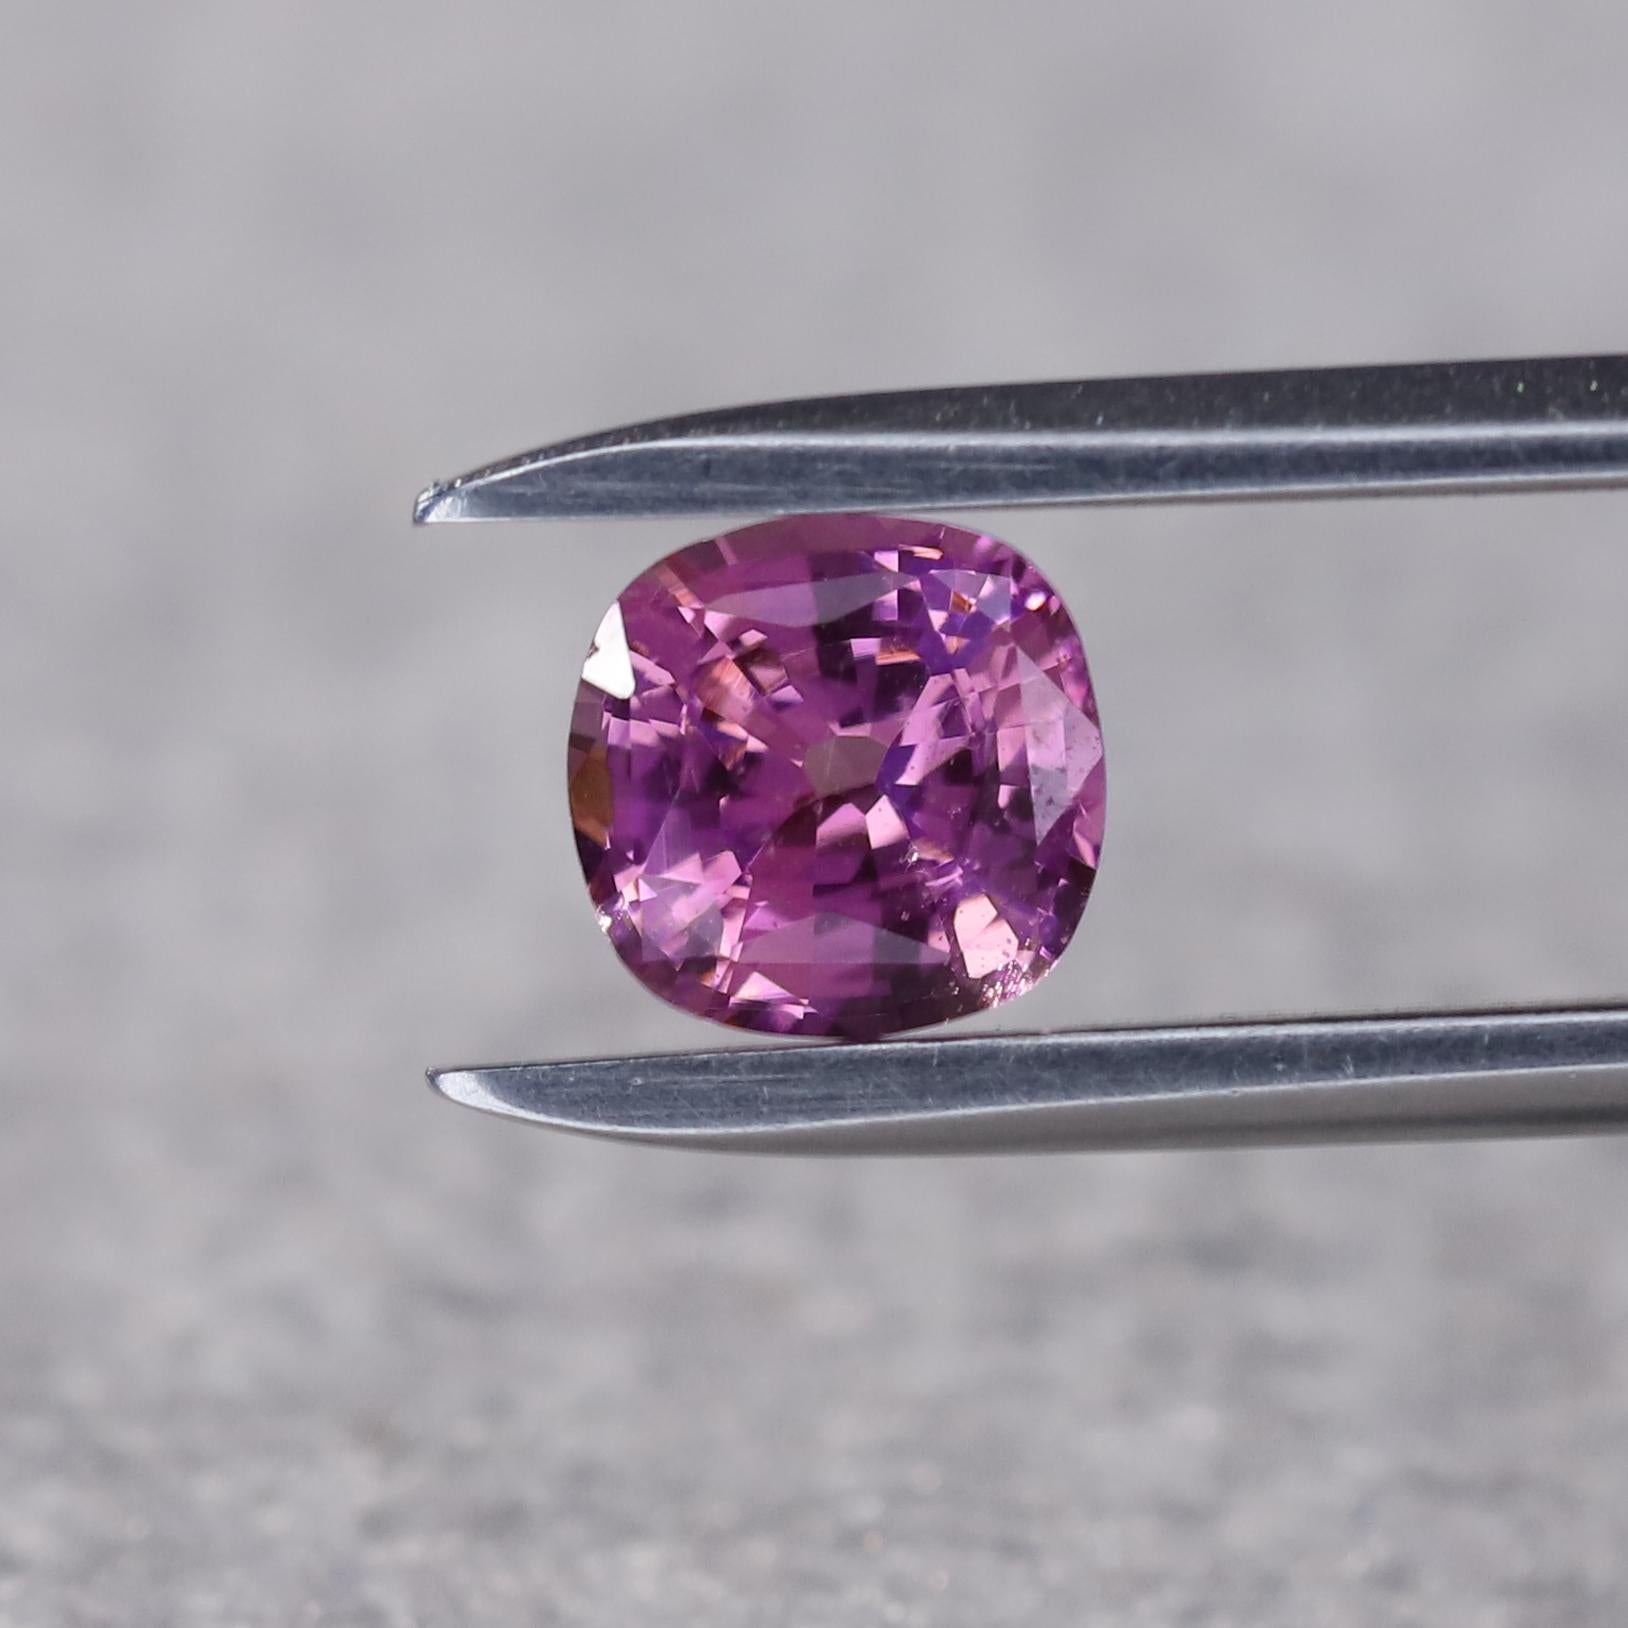 Women's 1.04 Carat Orchid Pink Natural Sapphire Loose Gemstone from Sri Lanka For Sale